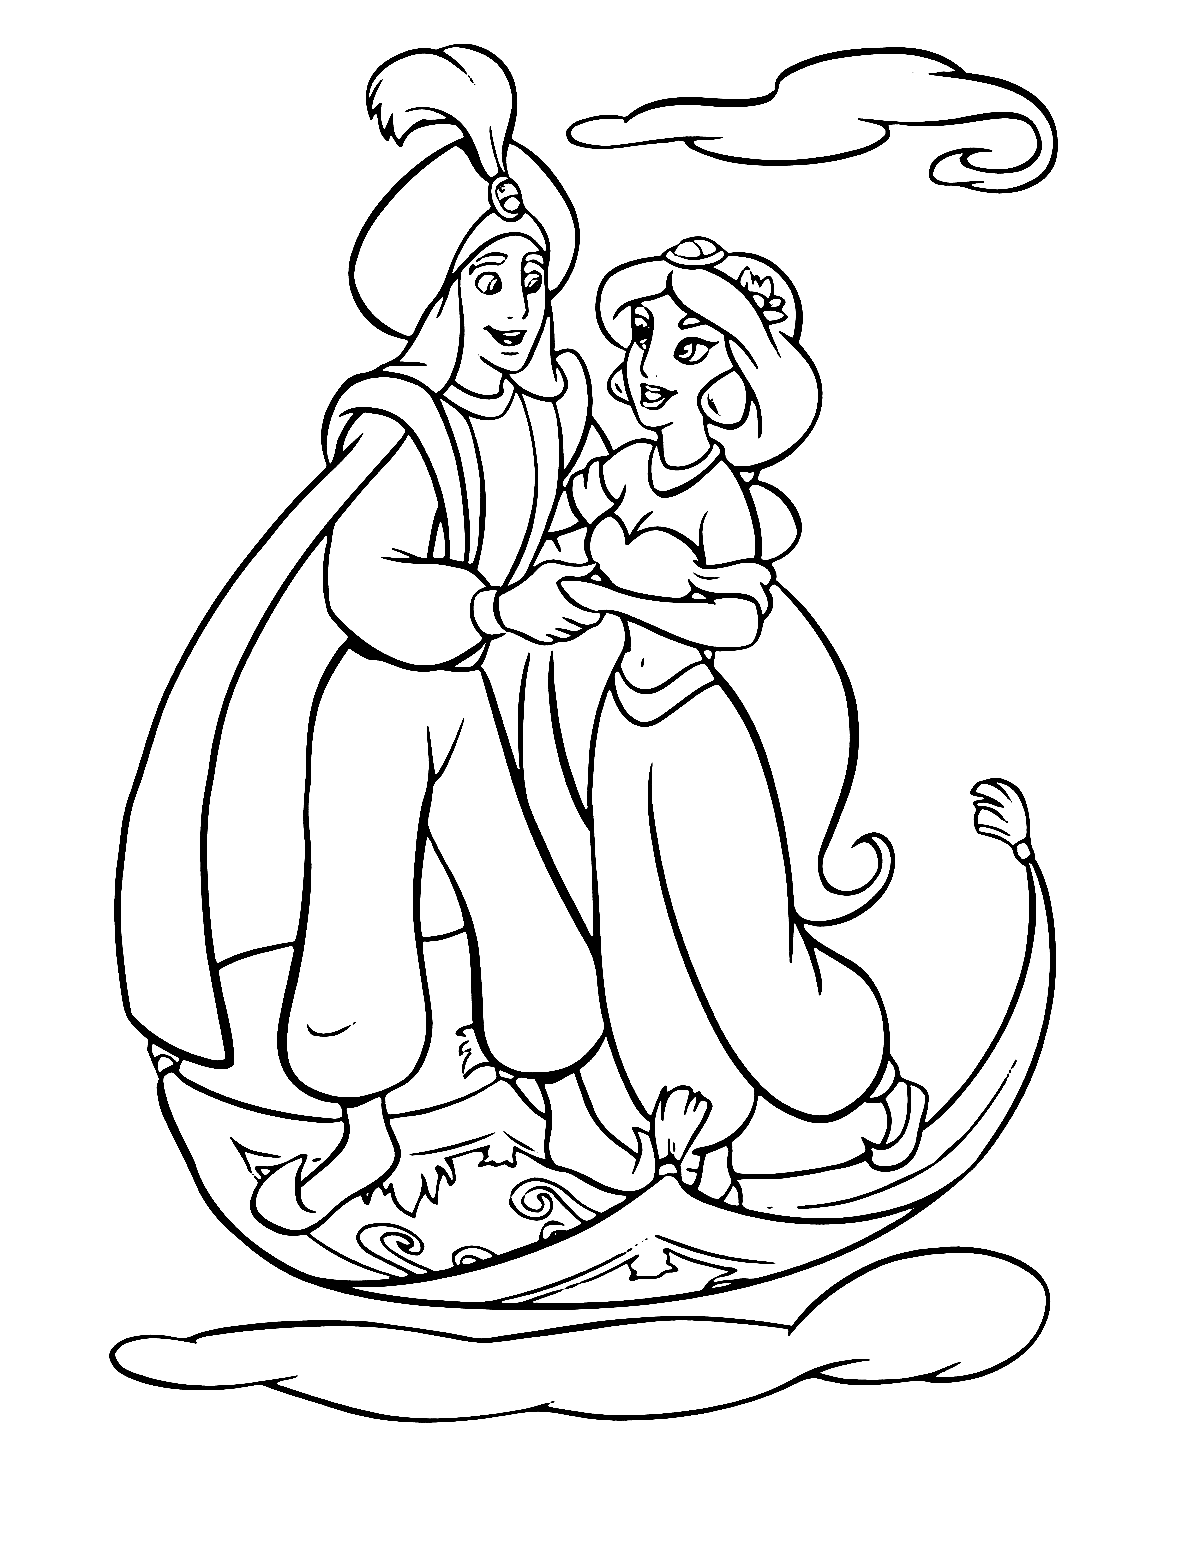 Aladdin & Jasmine Coloring Pages: Magical Moments